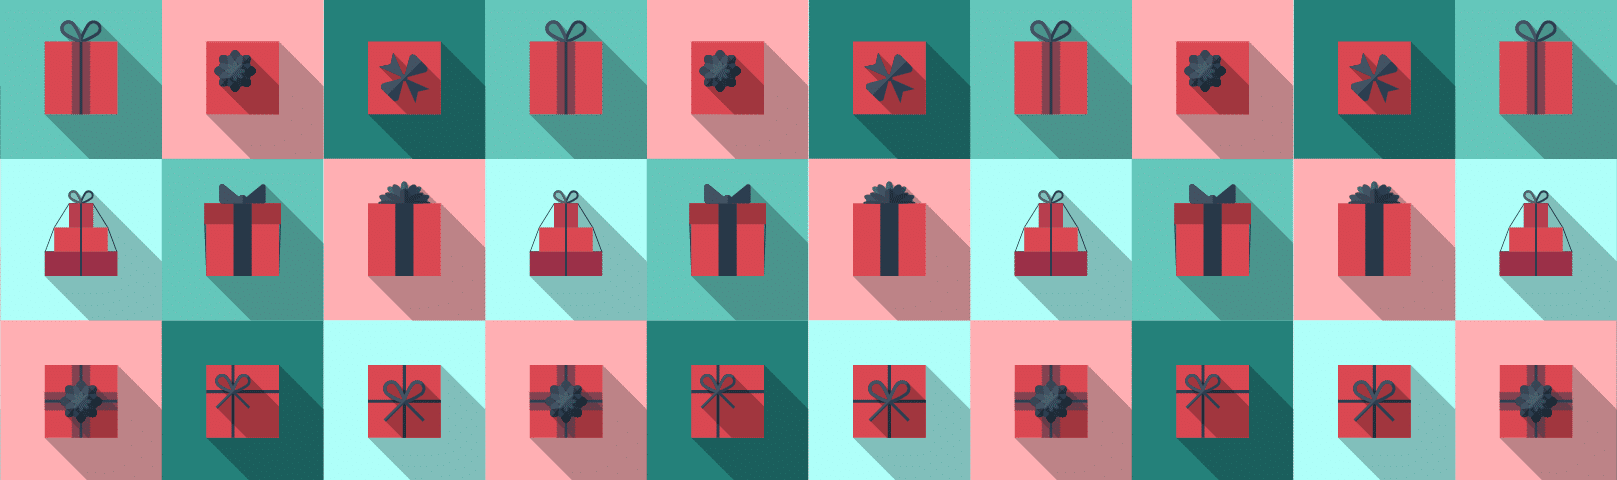 Holiday-Hearing Gift Giving: 6 Ideas That Wow.png